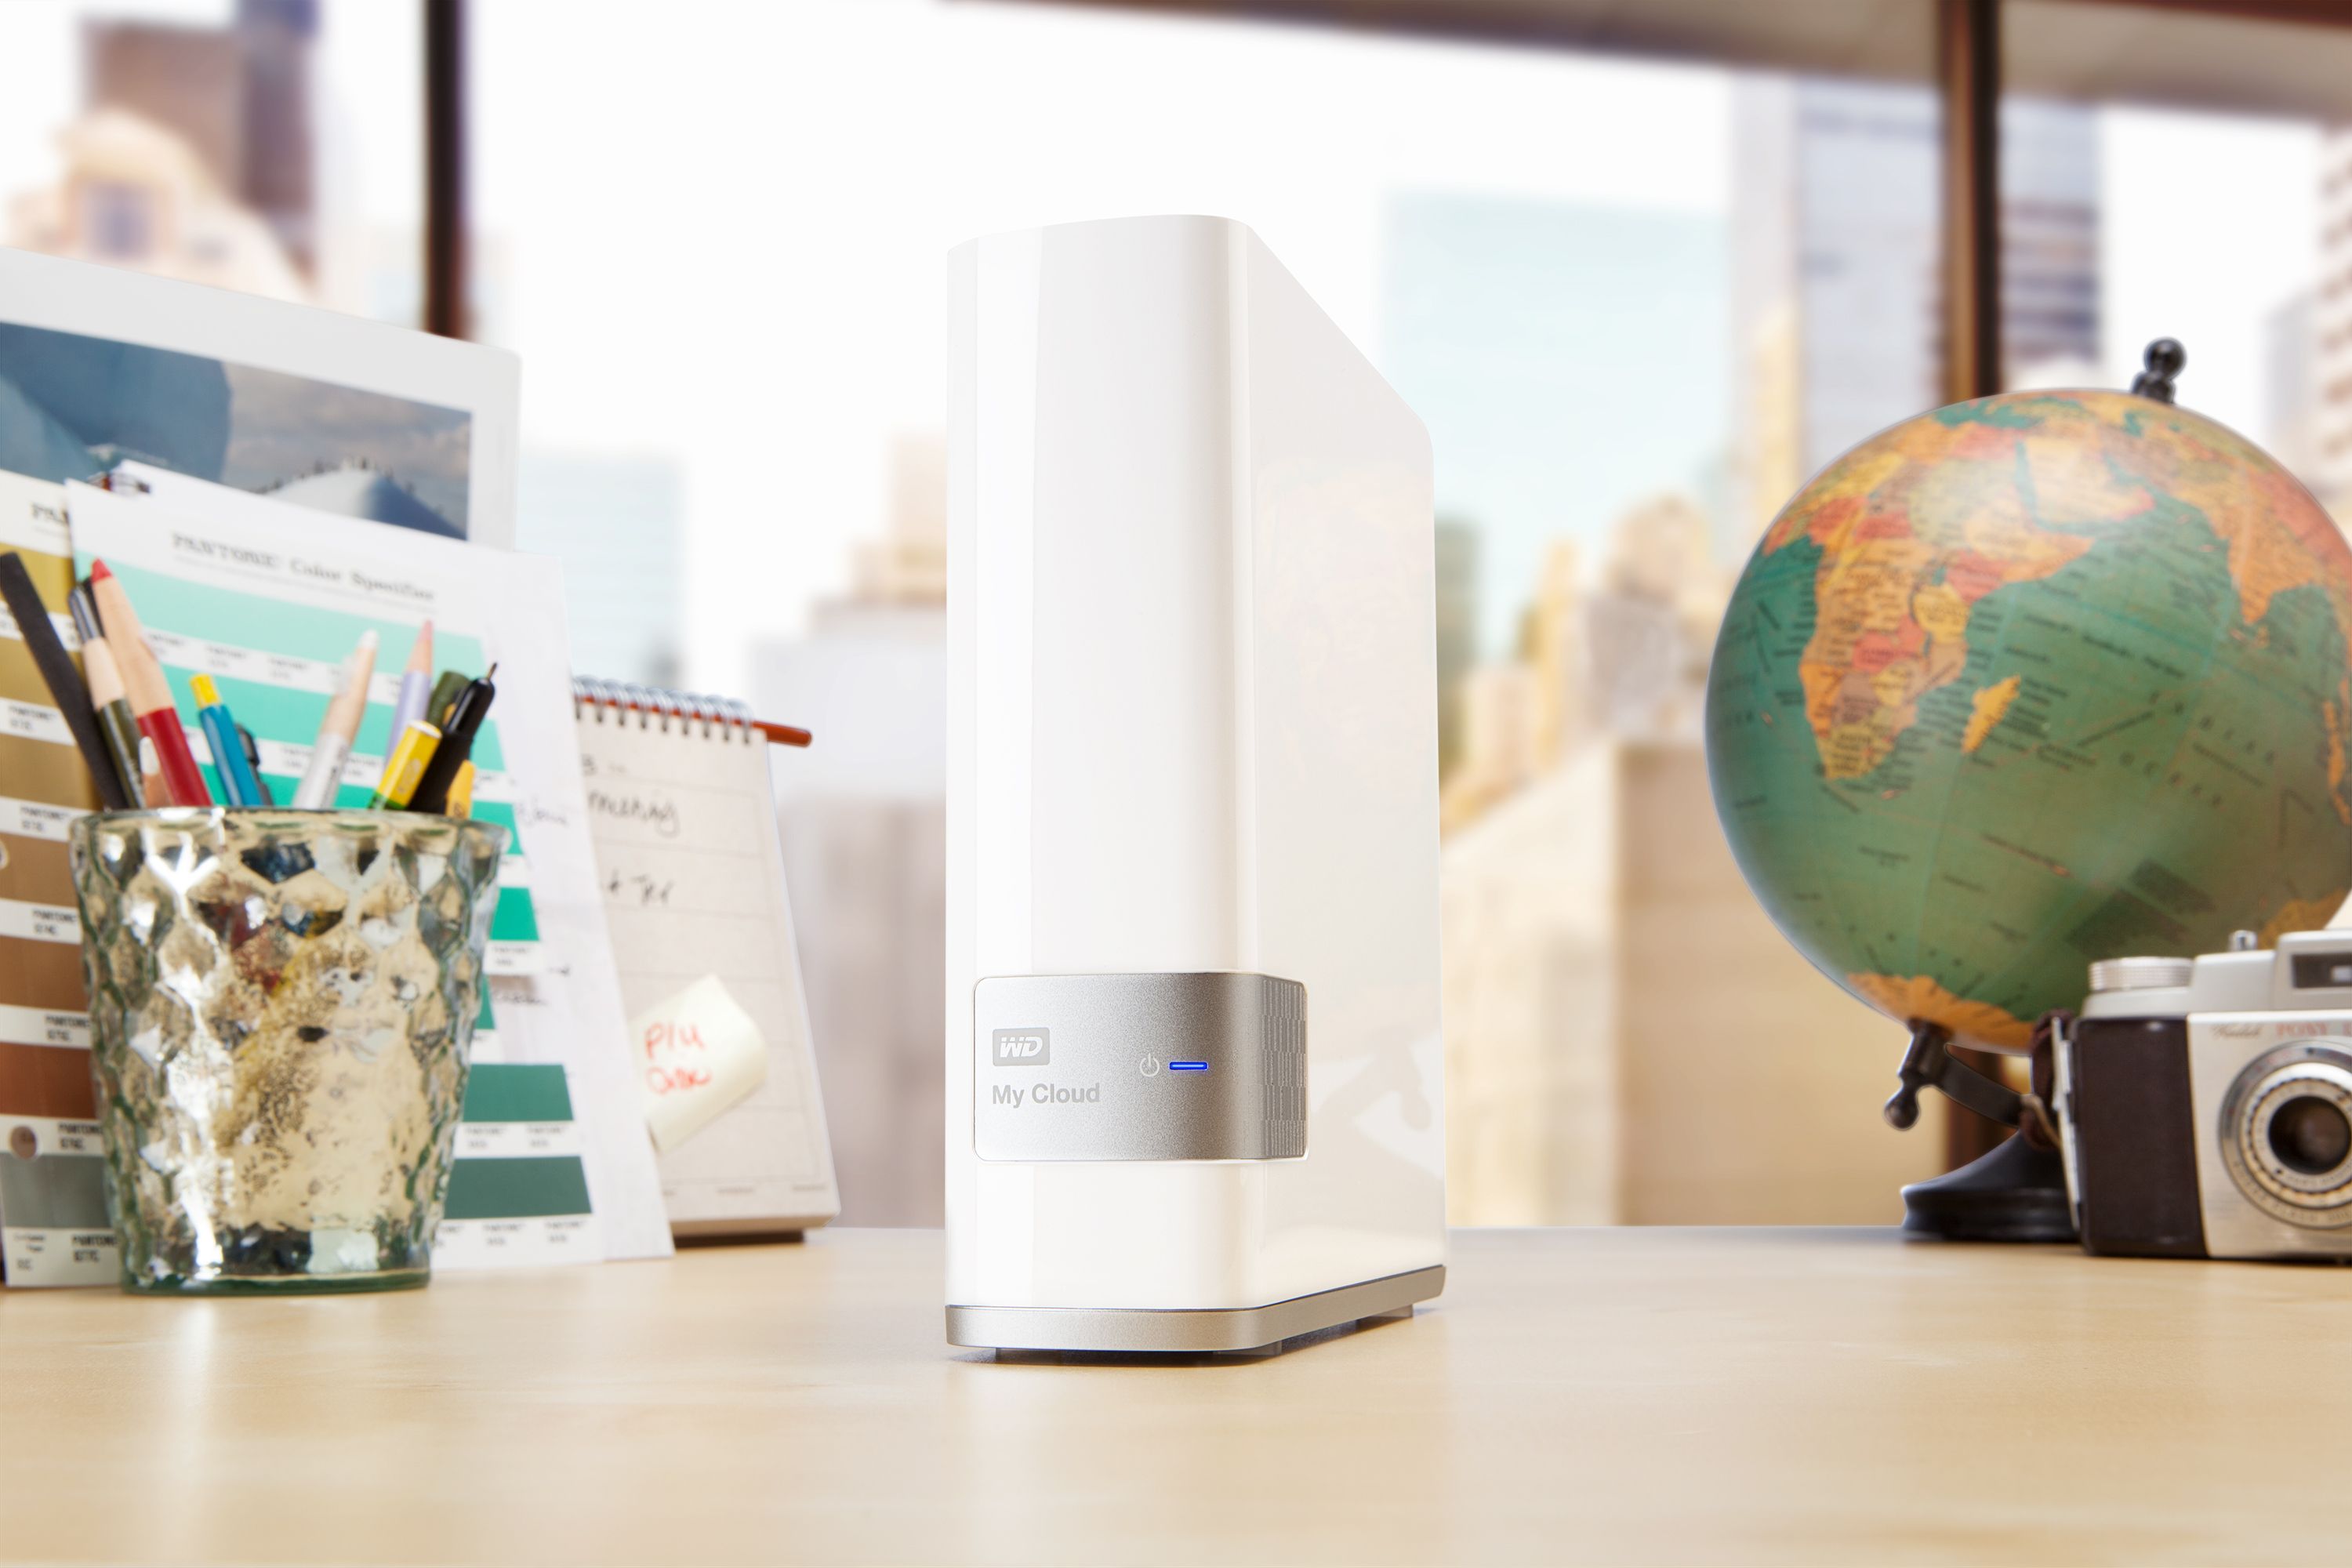 western digital mycloud nas drives cloudy with a chance of 4tb of storage image 1